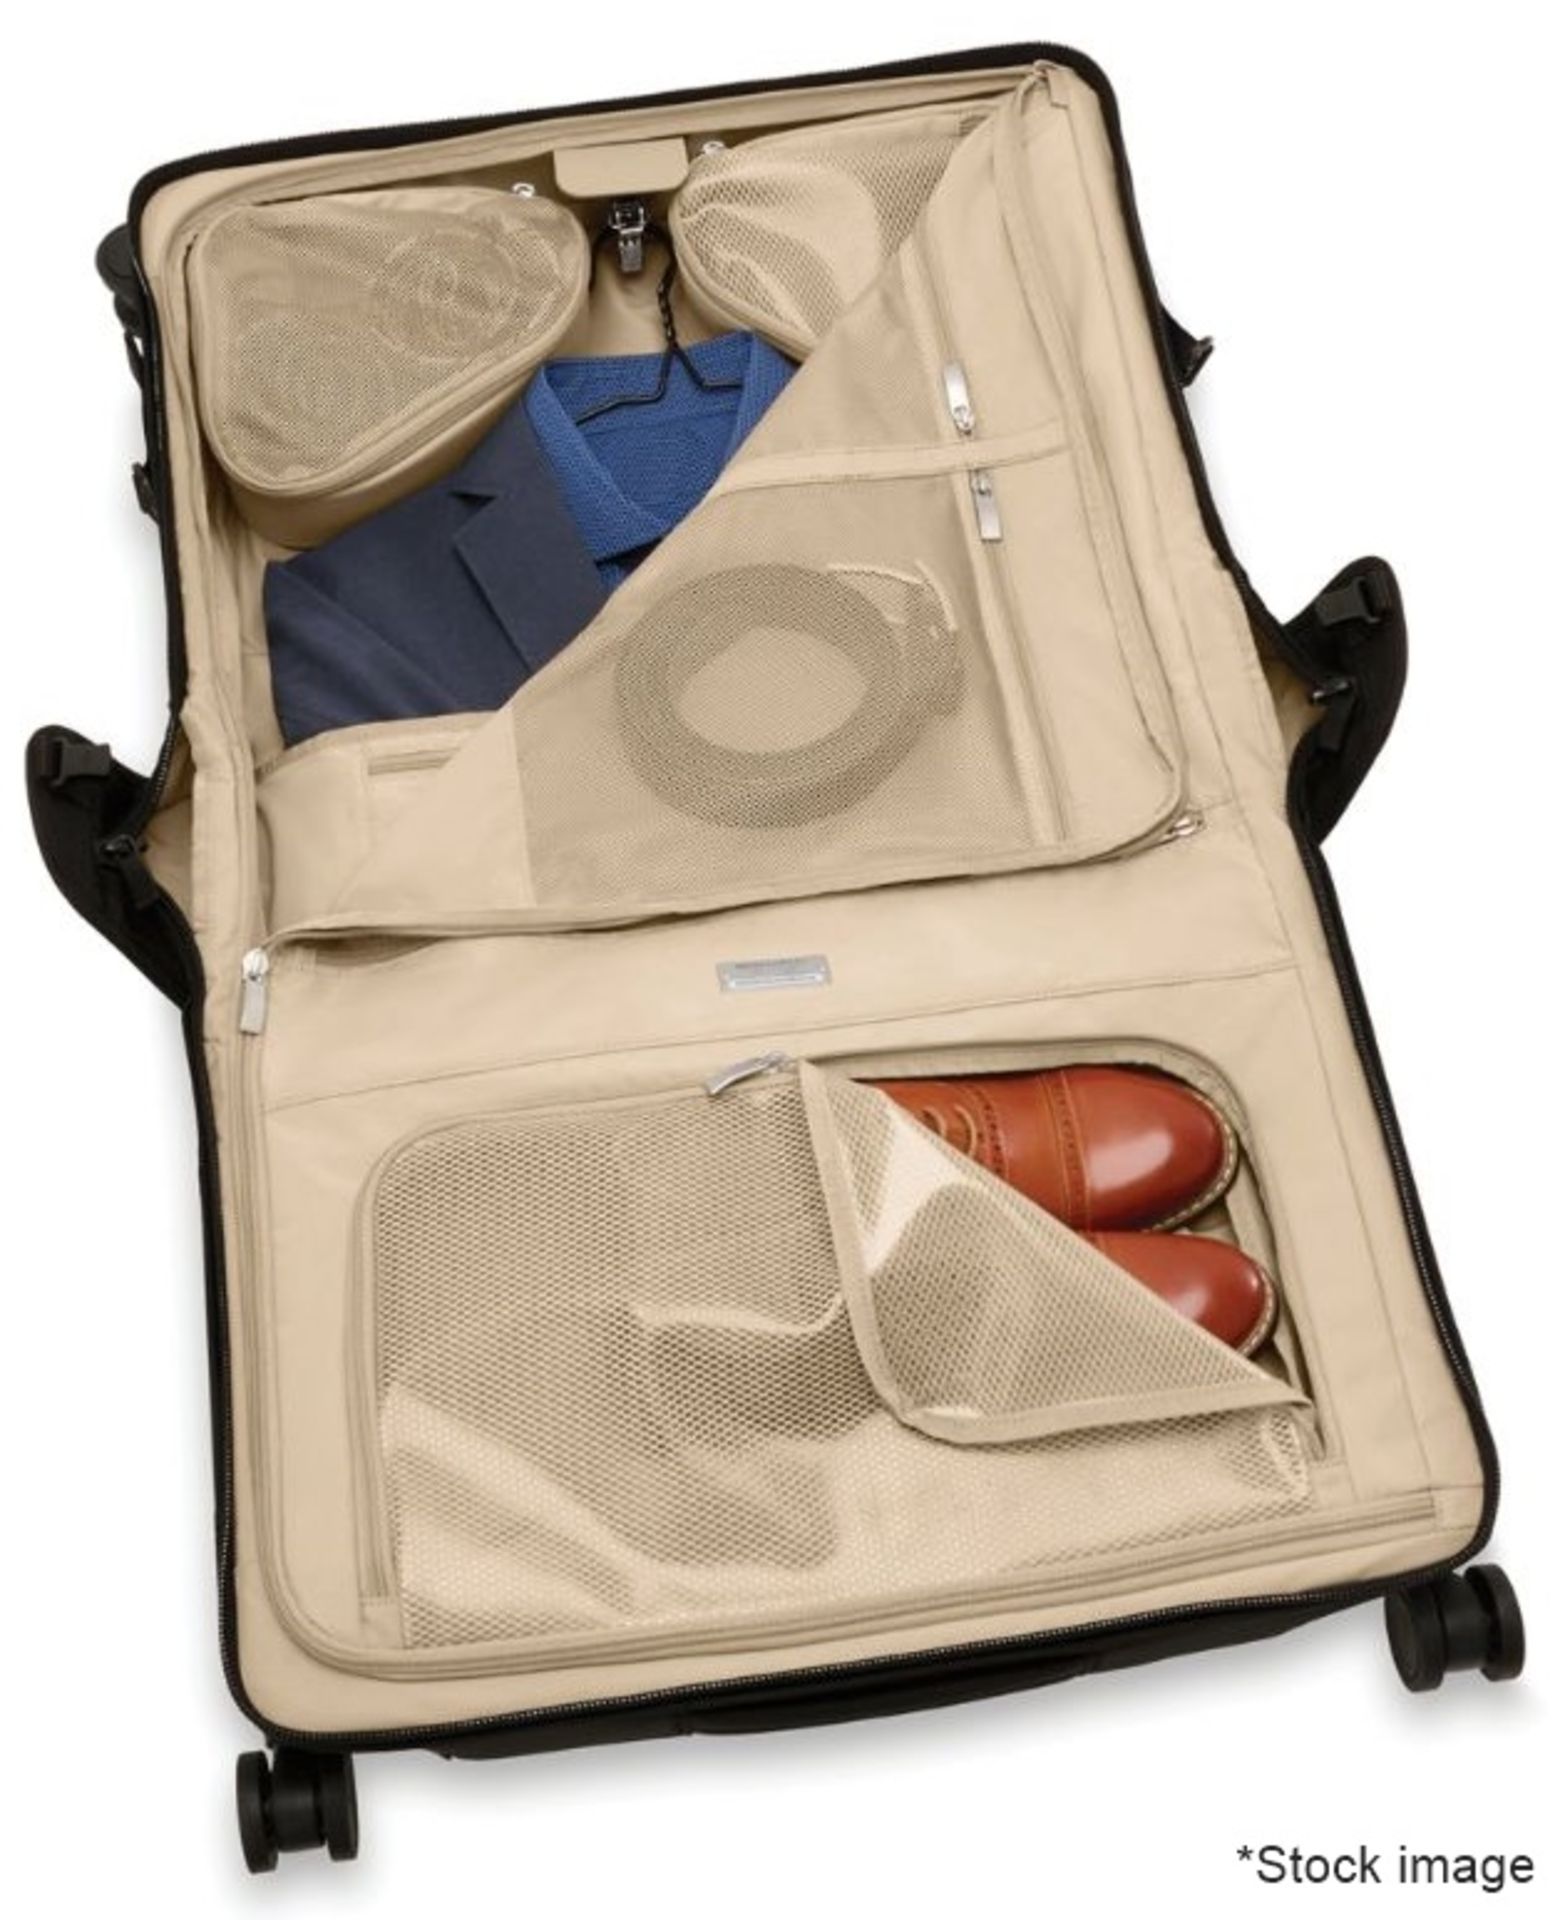 1 x BRIGGS & RILEY Wide Carry-On Baseline Garment Spinner Suitcase (40.5cm) - Original Price £629.00 - Image 2 of 24